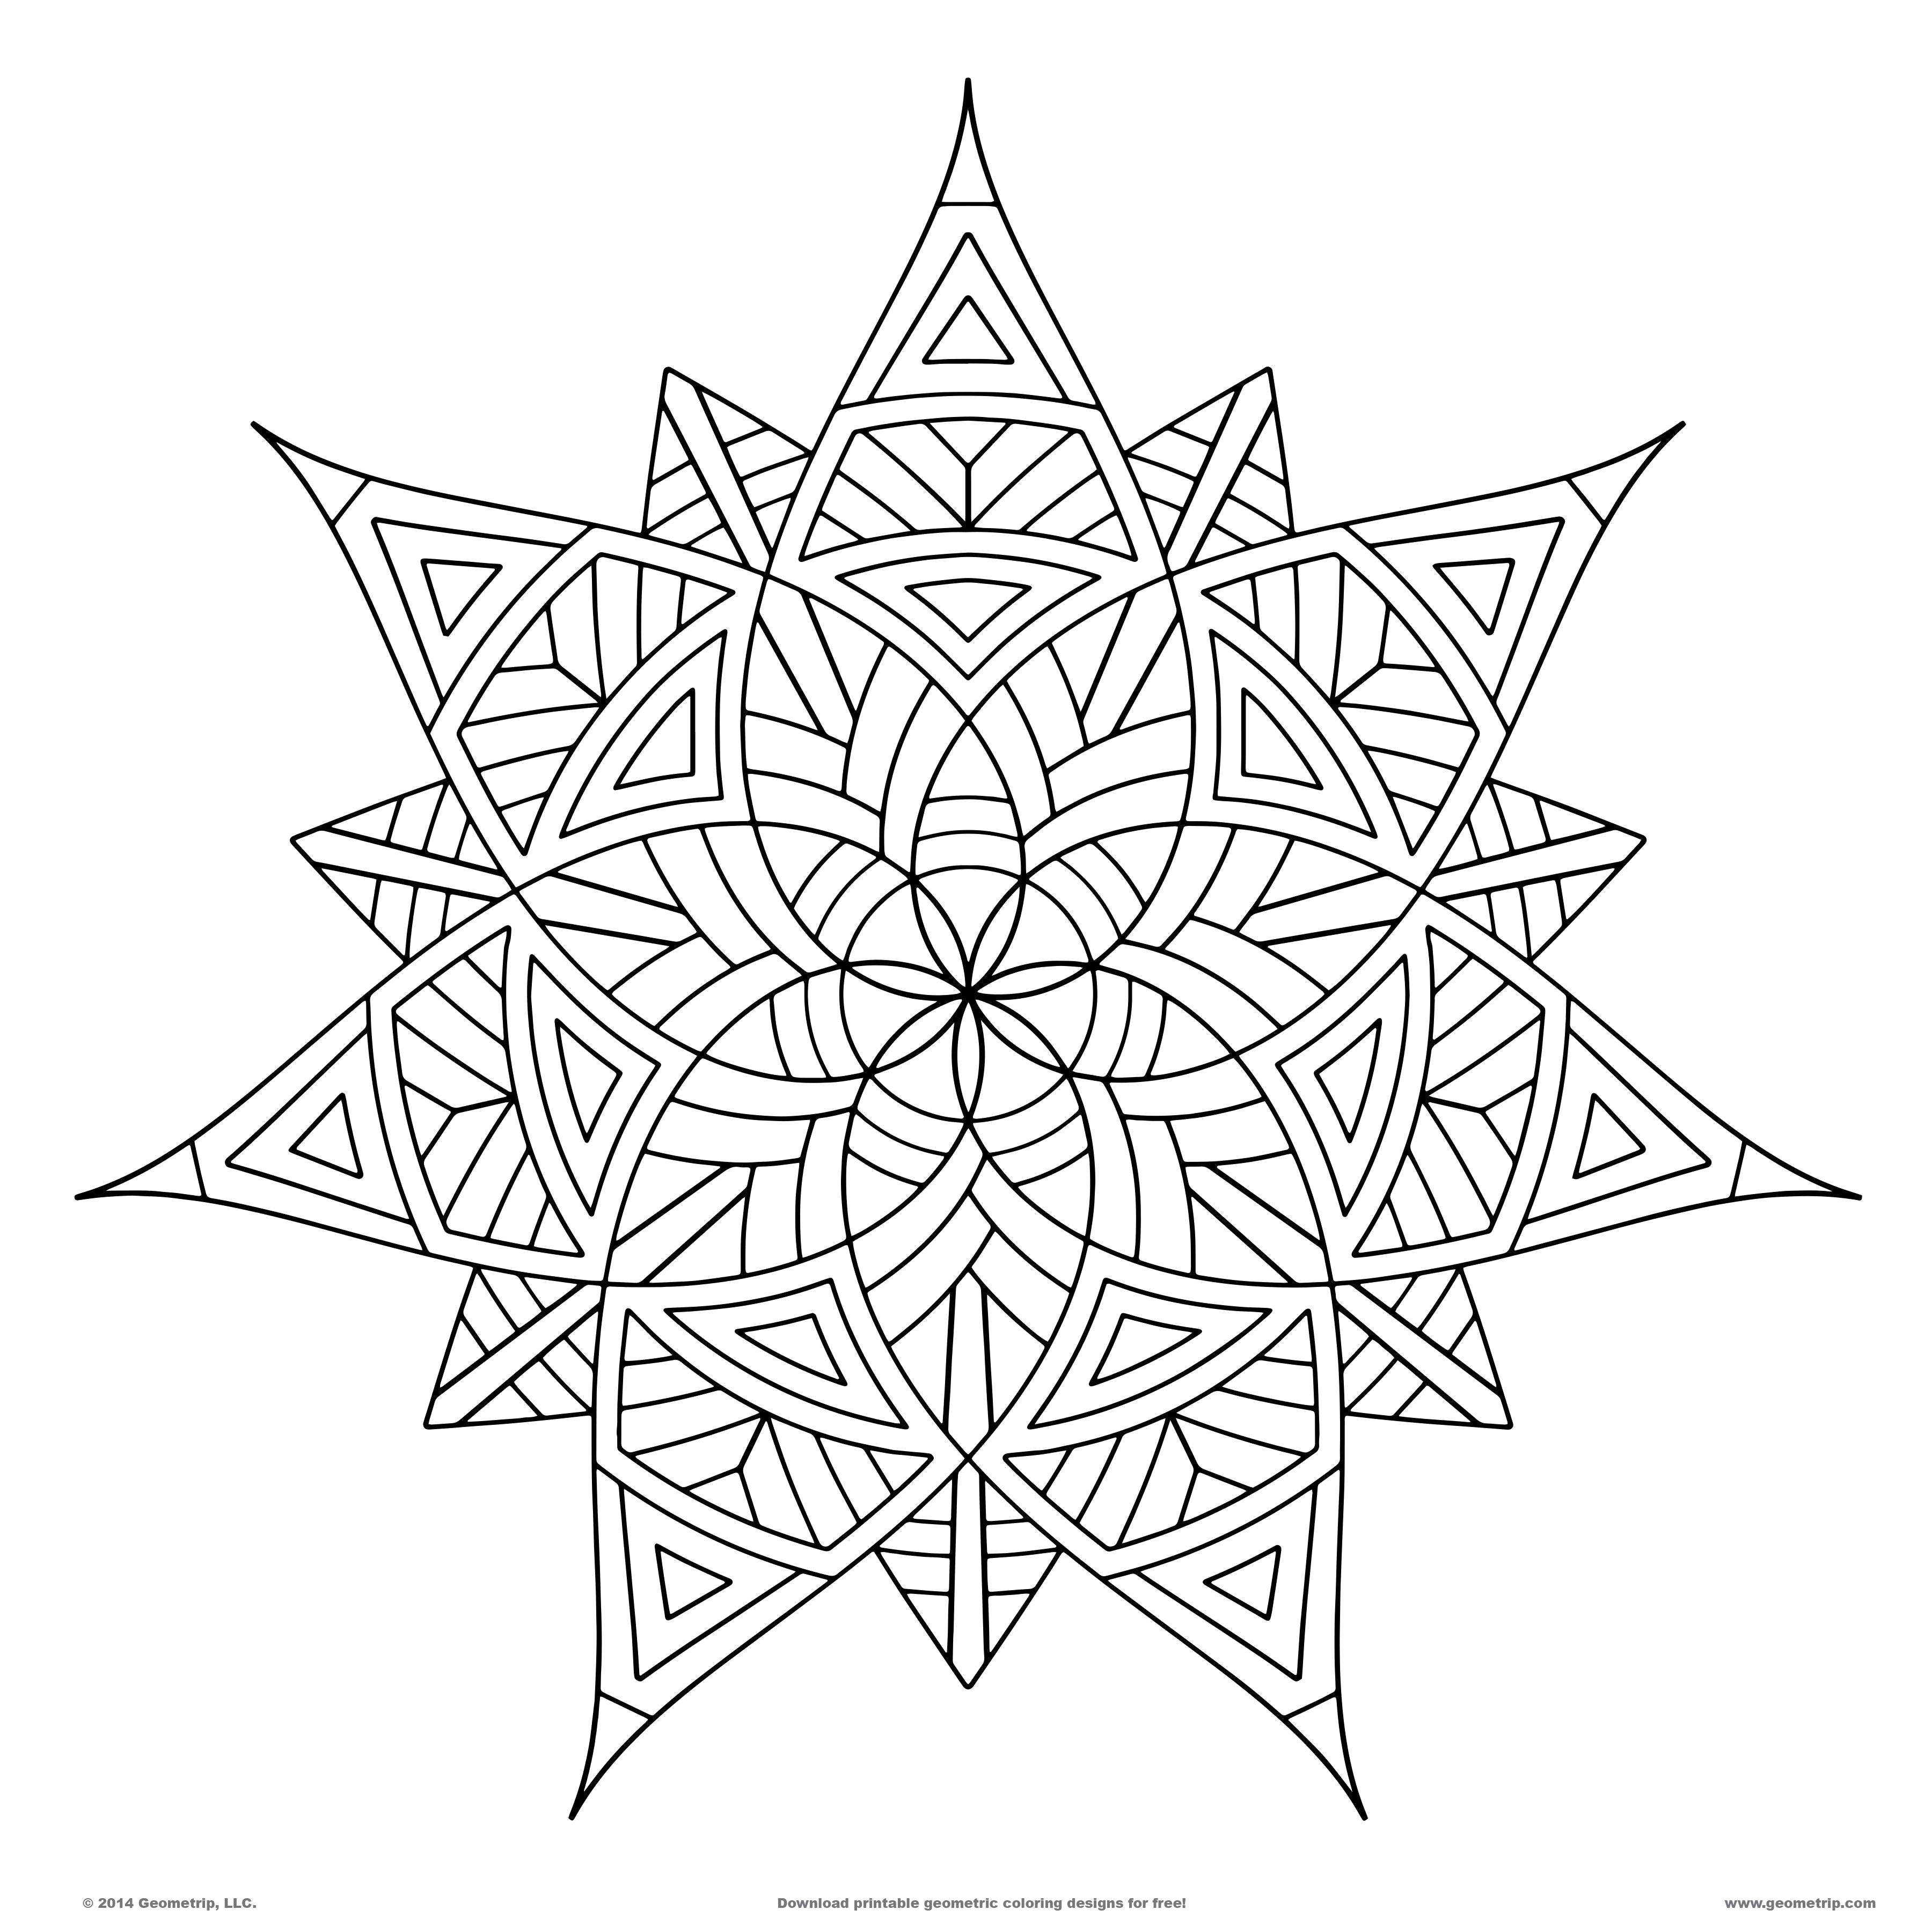 Coloring Ethnic flower. Category Patterns with flowers. Tags:  Patterns, ethnic.